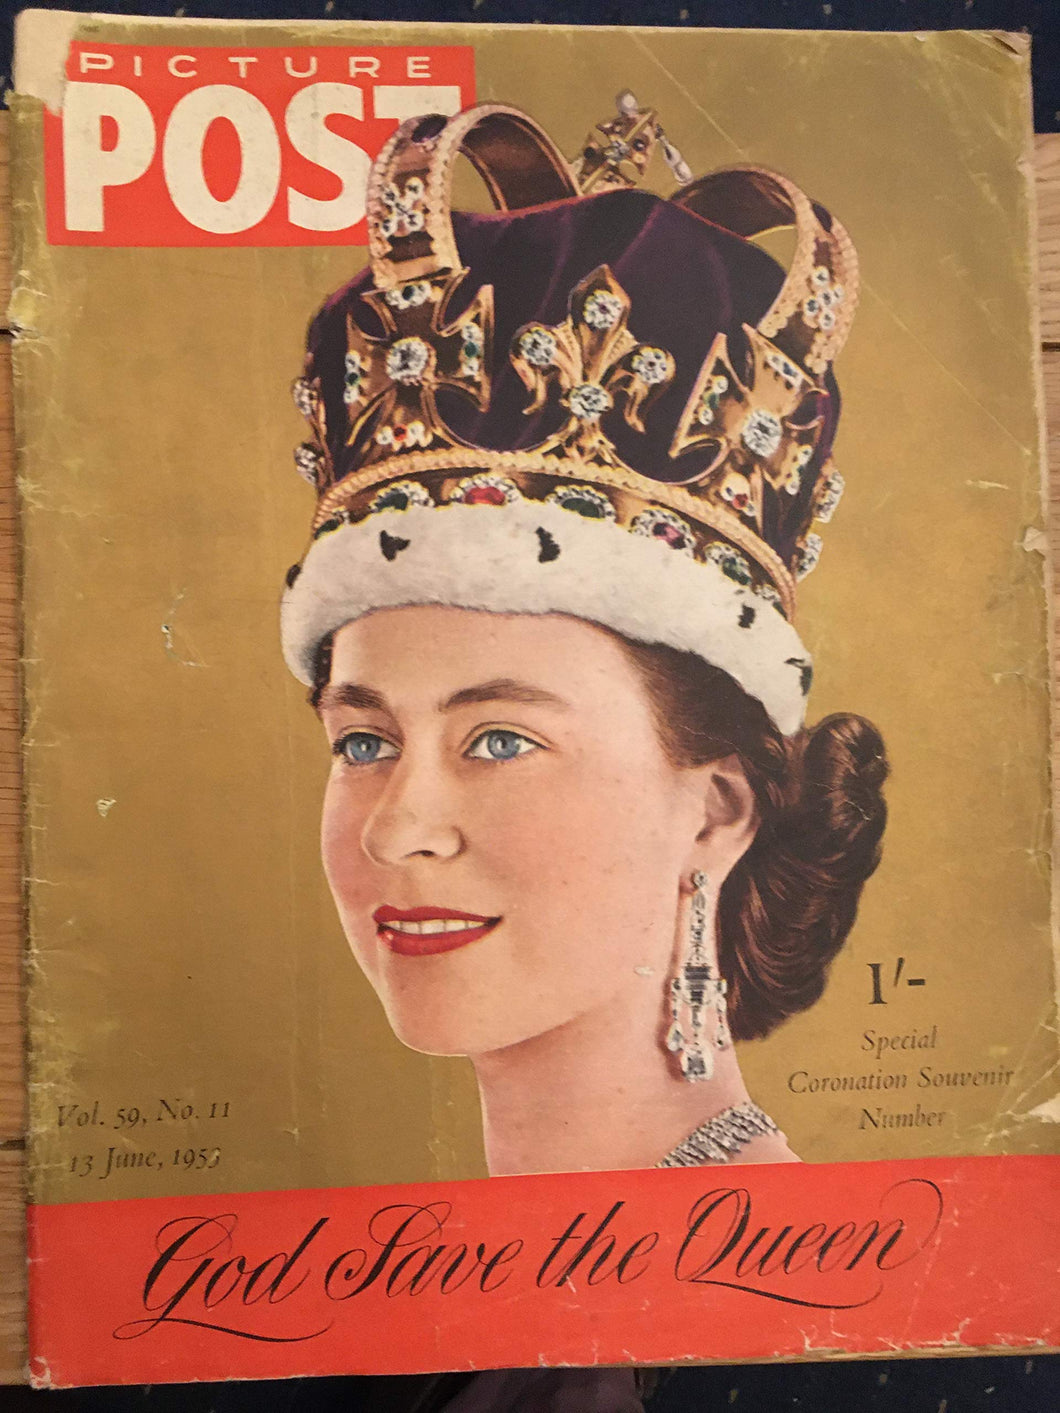 Picture Post Special Coronation Souvenir Number 13 June 1953. Vol. 59, No. 11 [Unknown Binding]